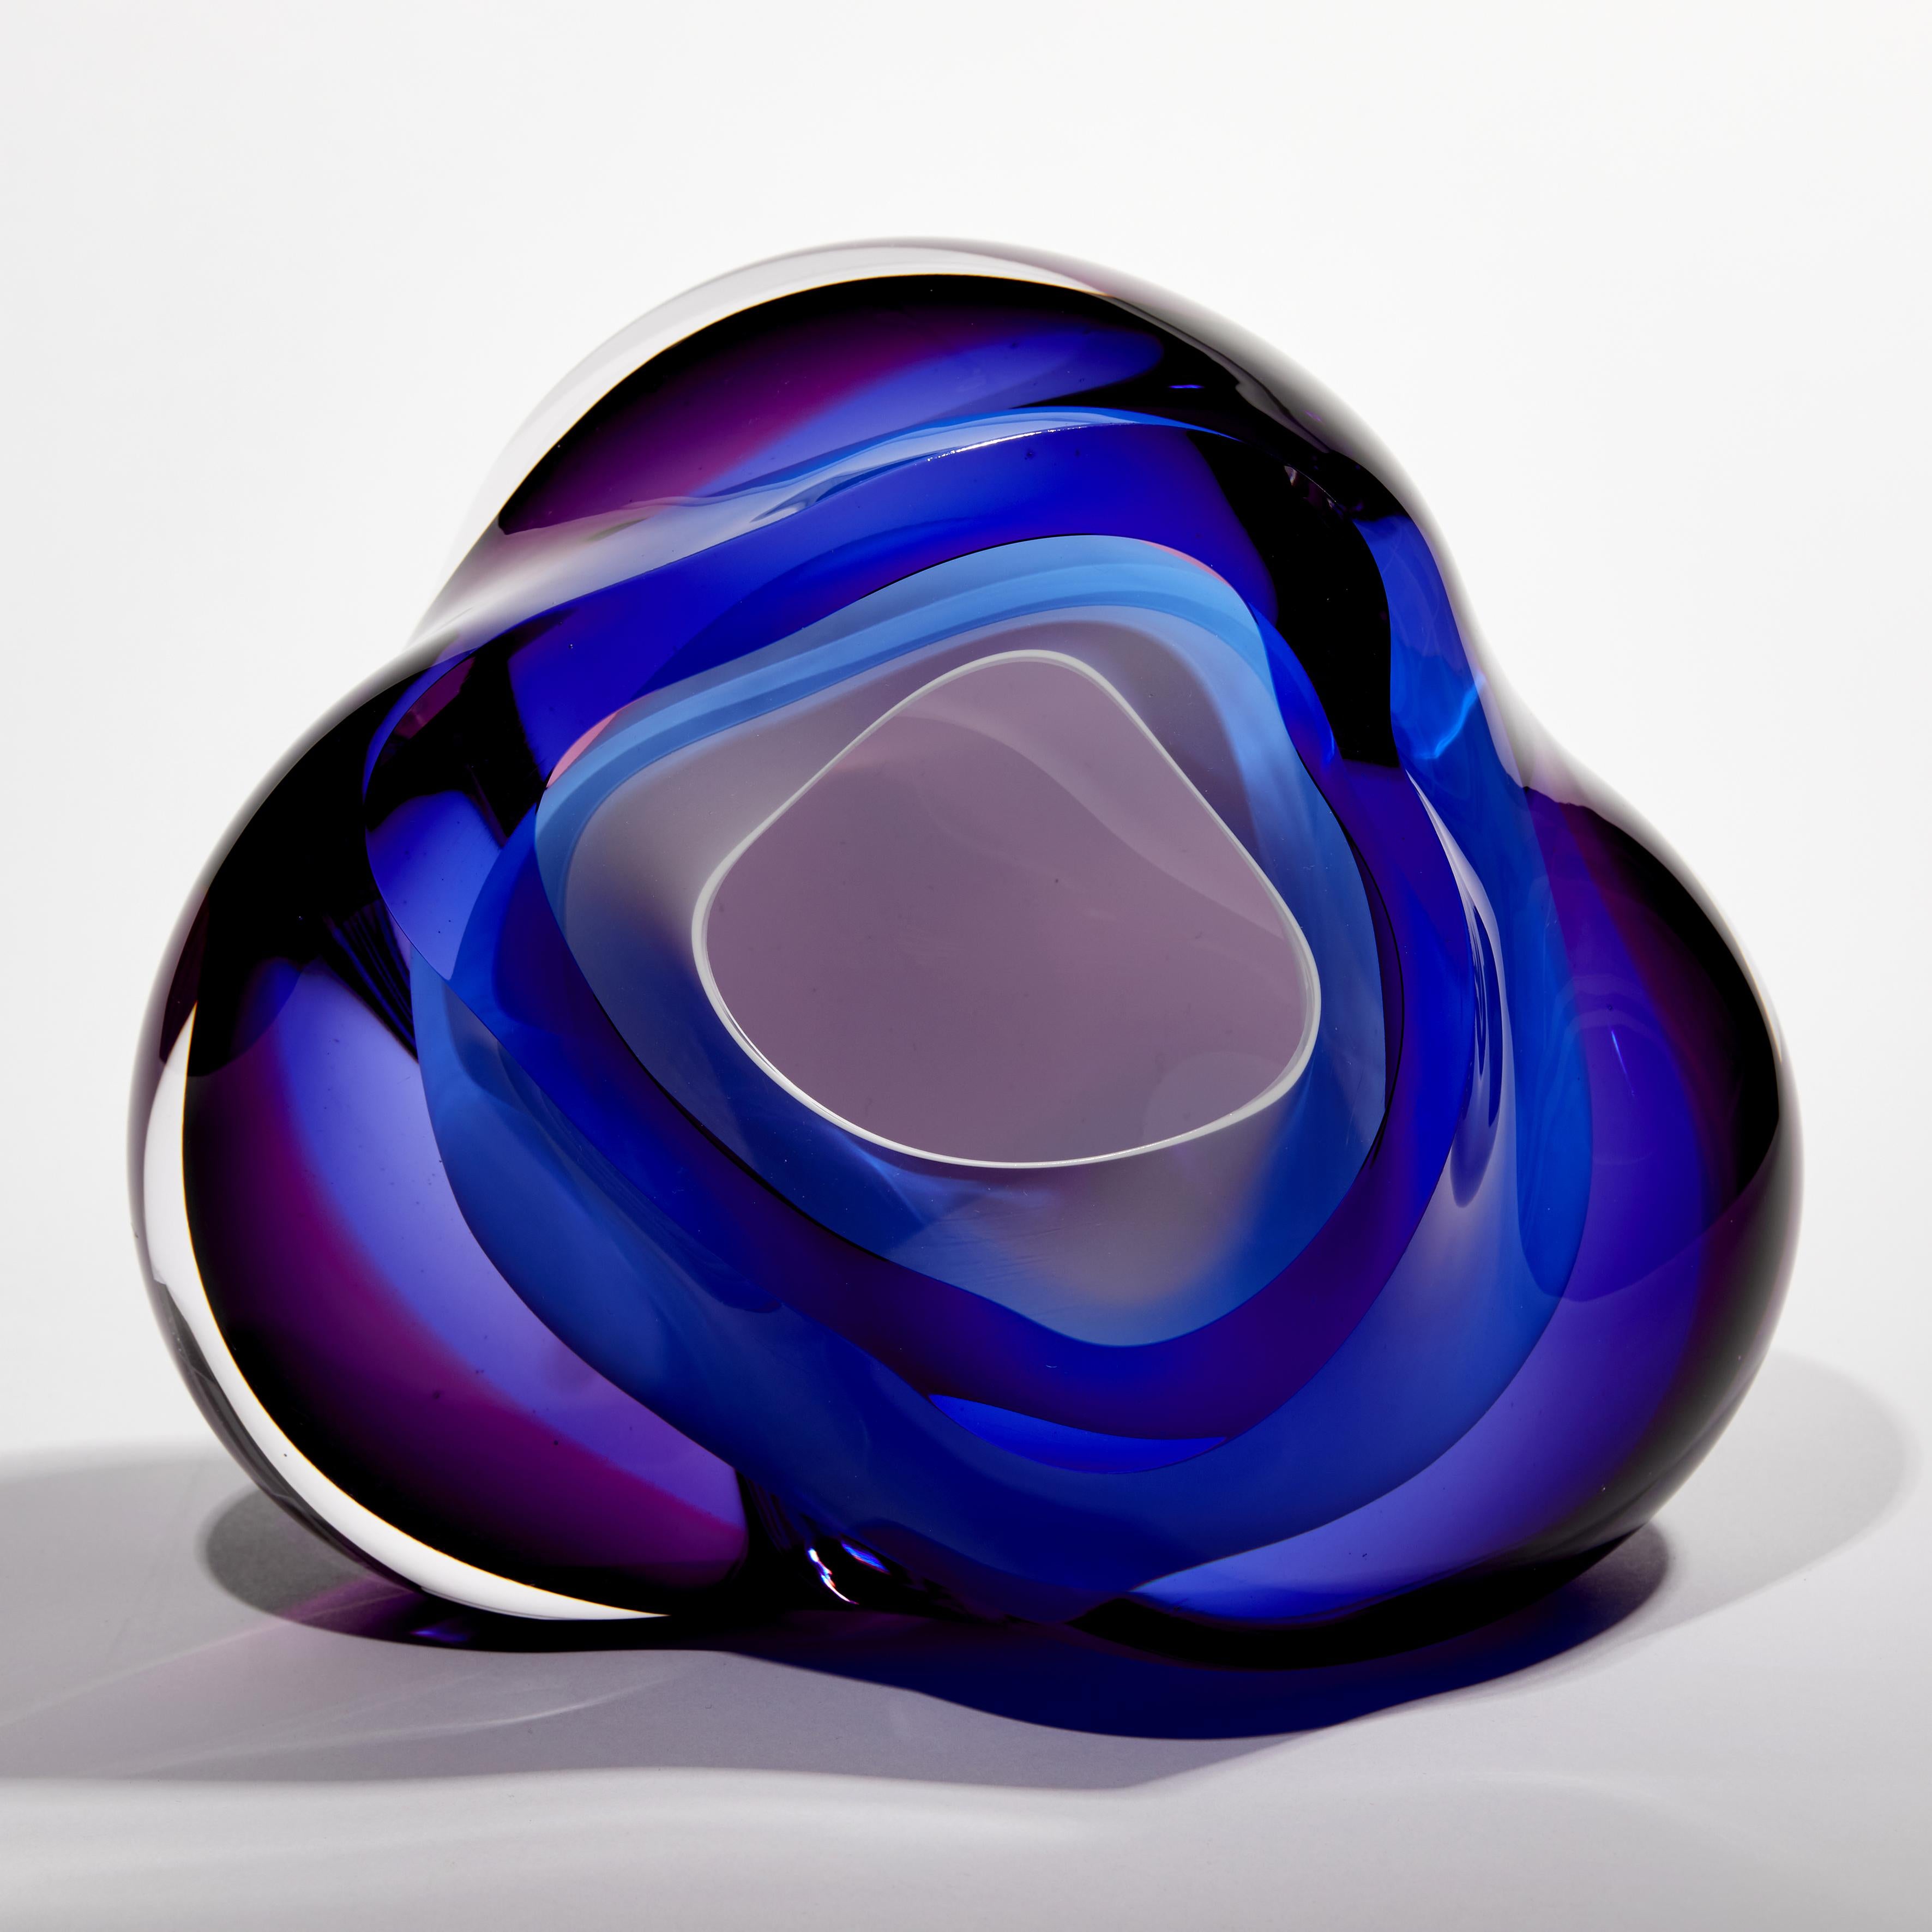 Chromatic Vug in Blue & Fuchsia II is a unique handblown sculpture by the British artist Samantha Donaldson. An intense mass of blue and purple contrast with the soft white interior. Taking inspiration from rock formations, geodes and the treasures